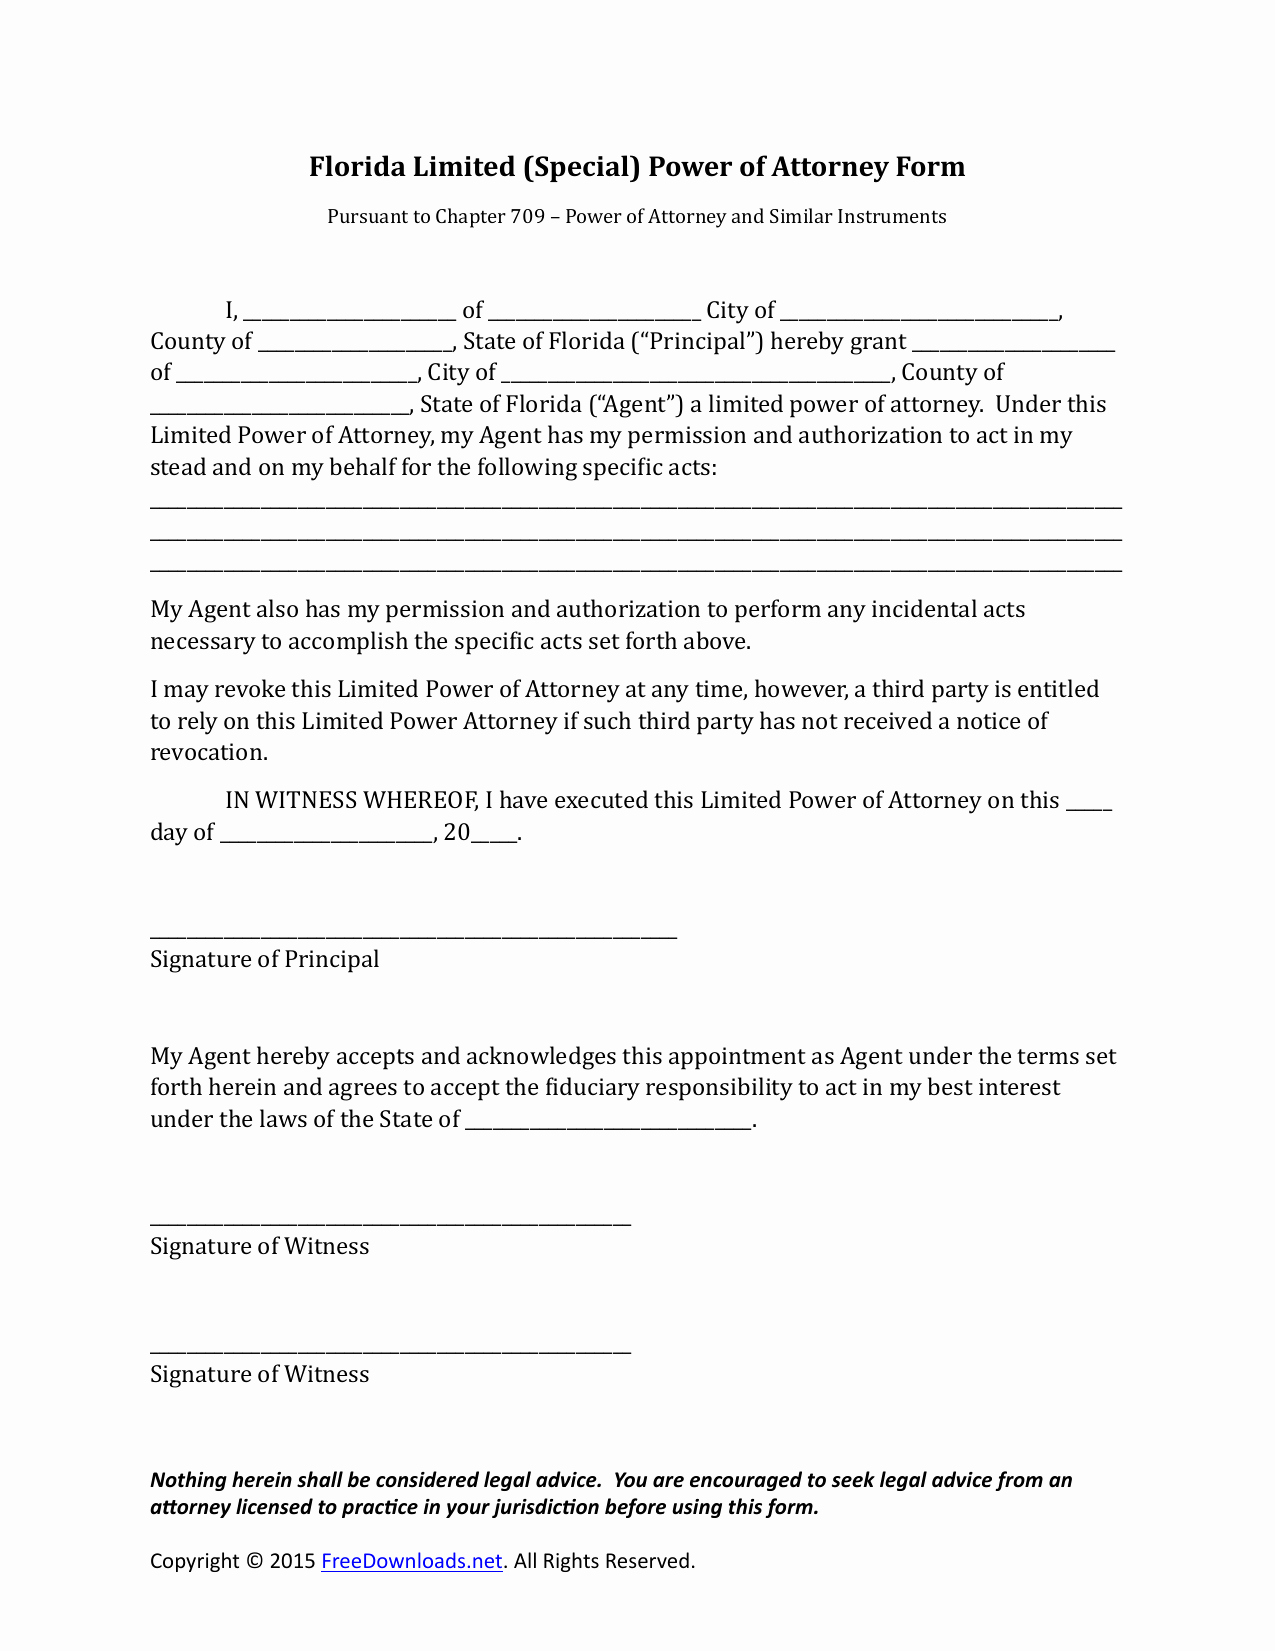 Free Power Of attorney New Download Florida Special Limited Power Of attorney form